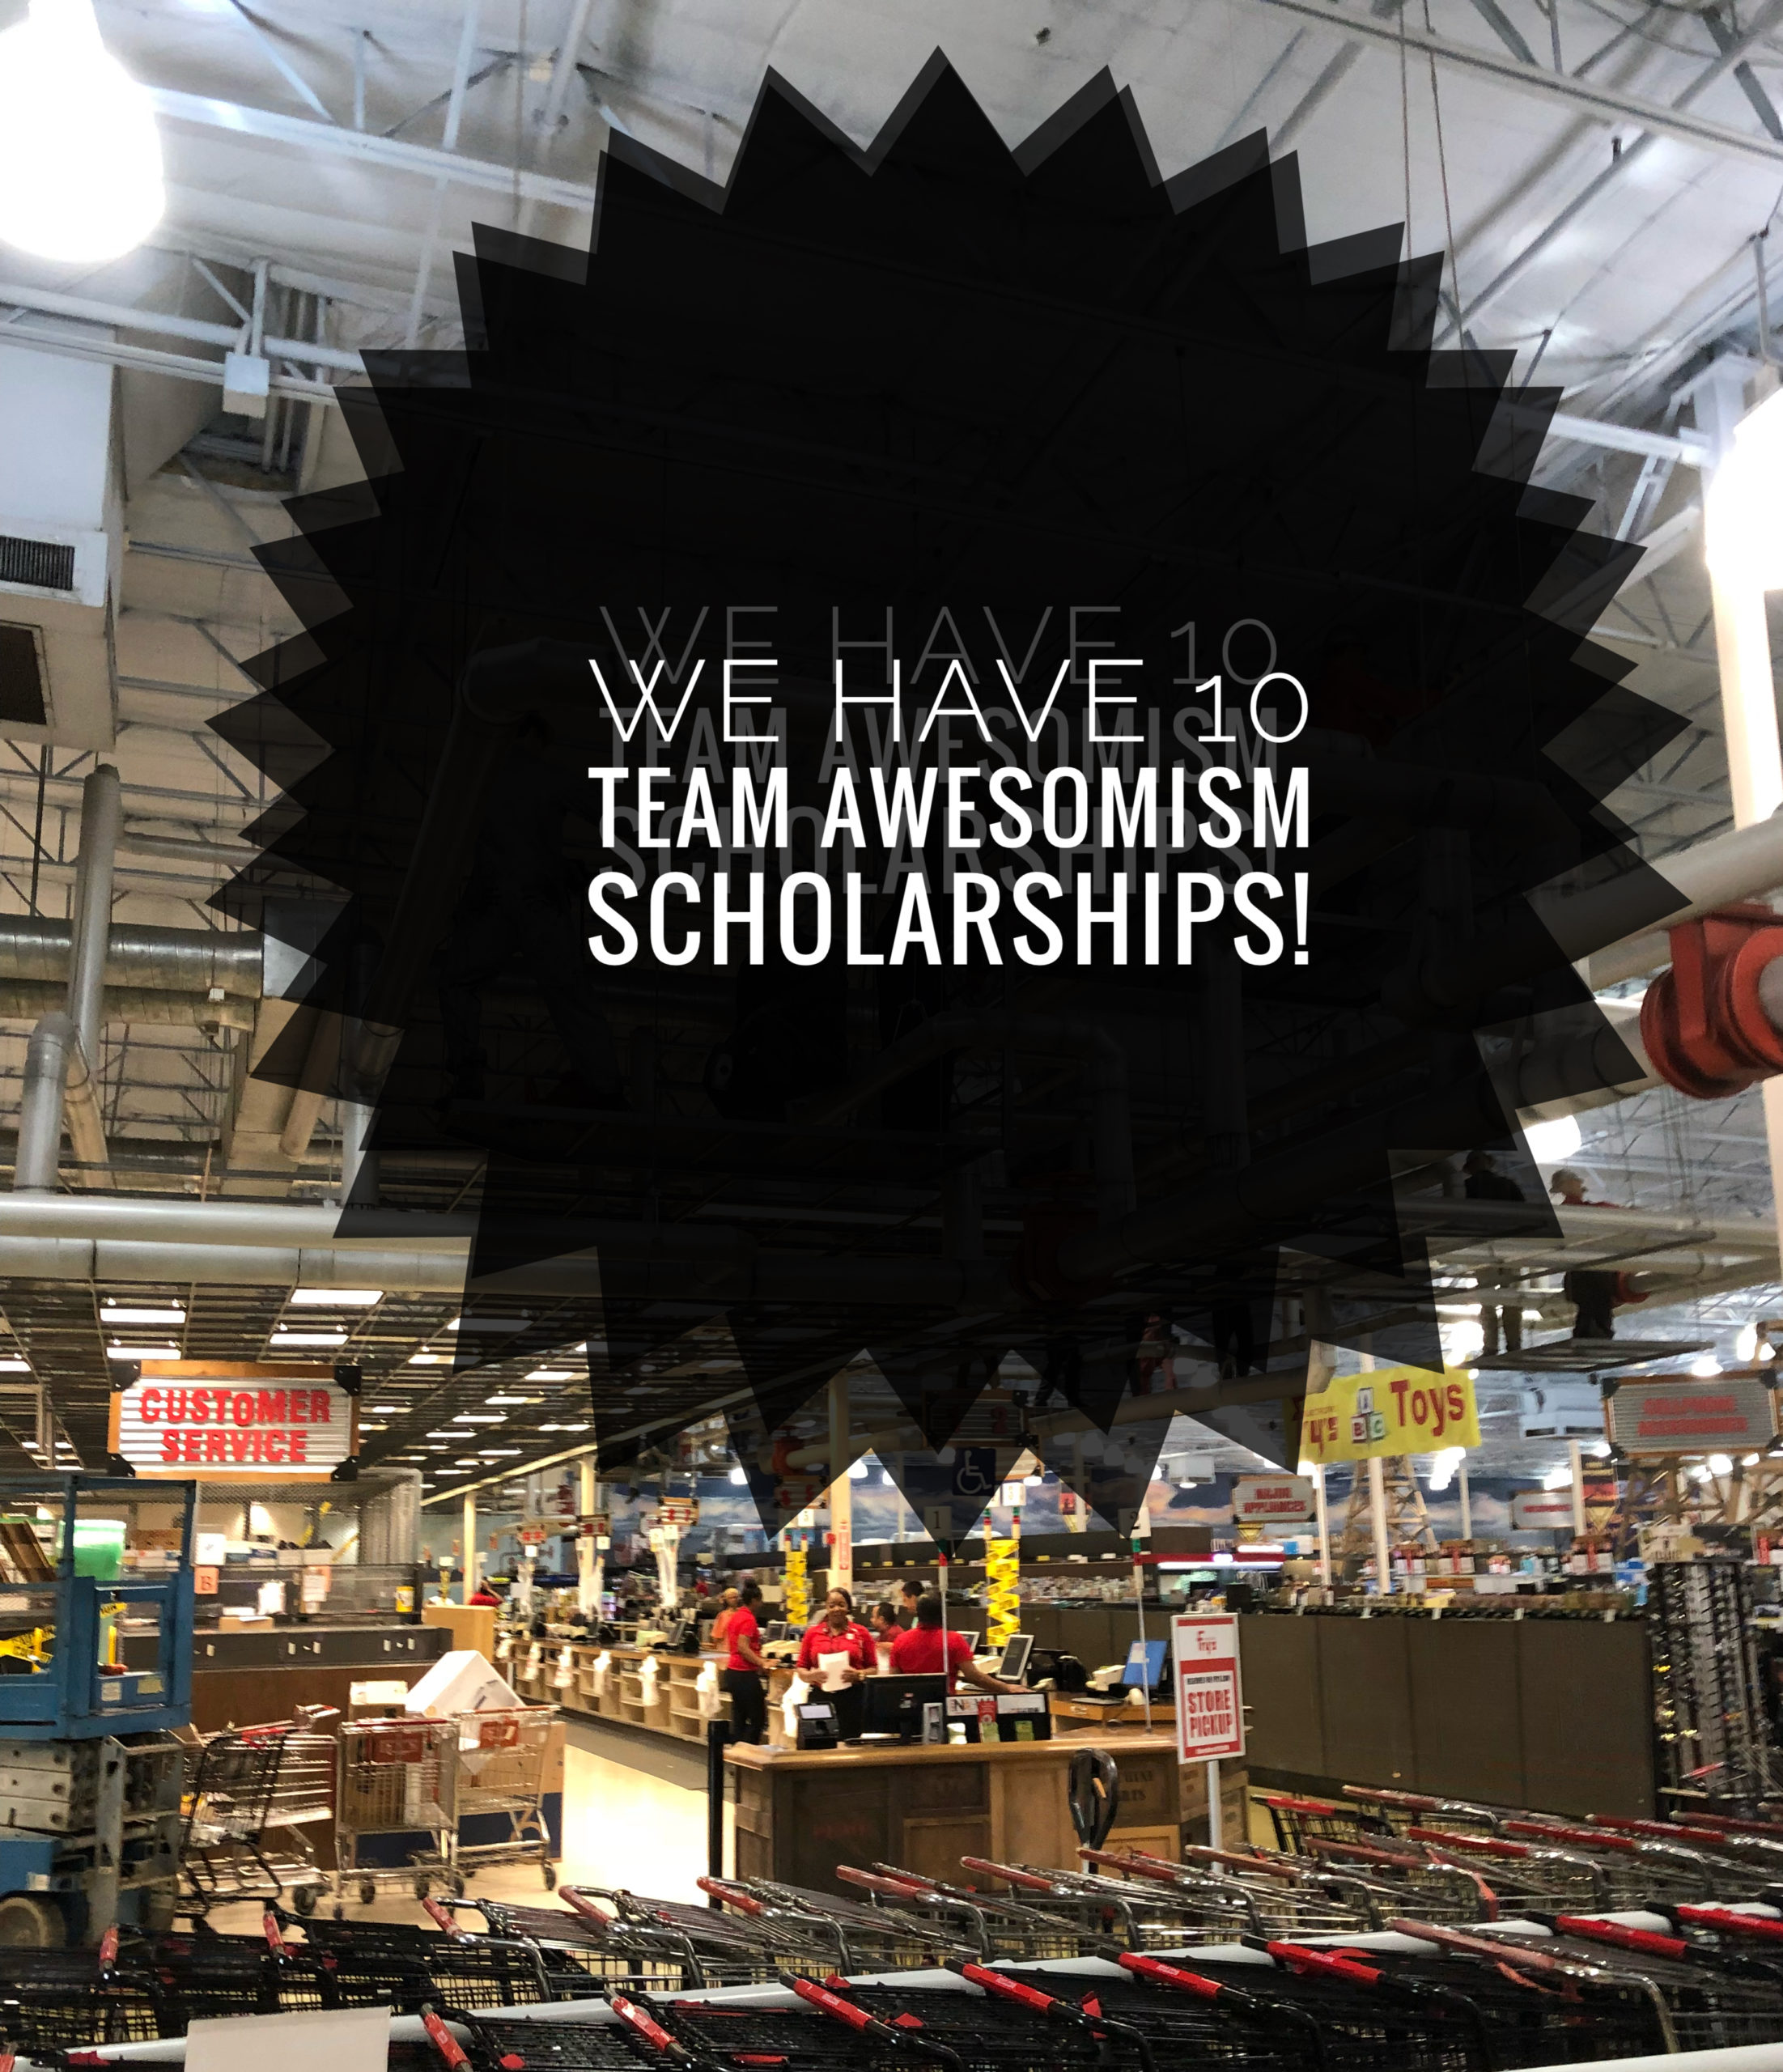 You are currently viewing 10 Team Awesomism Scholarships!